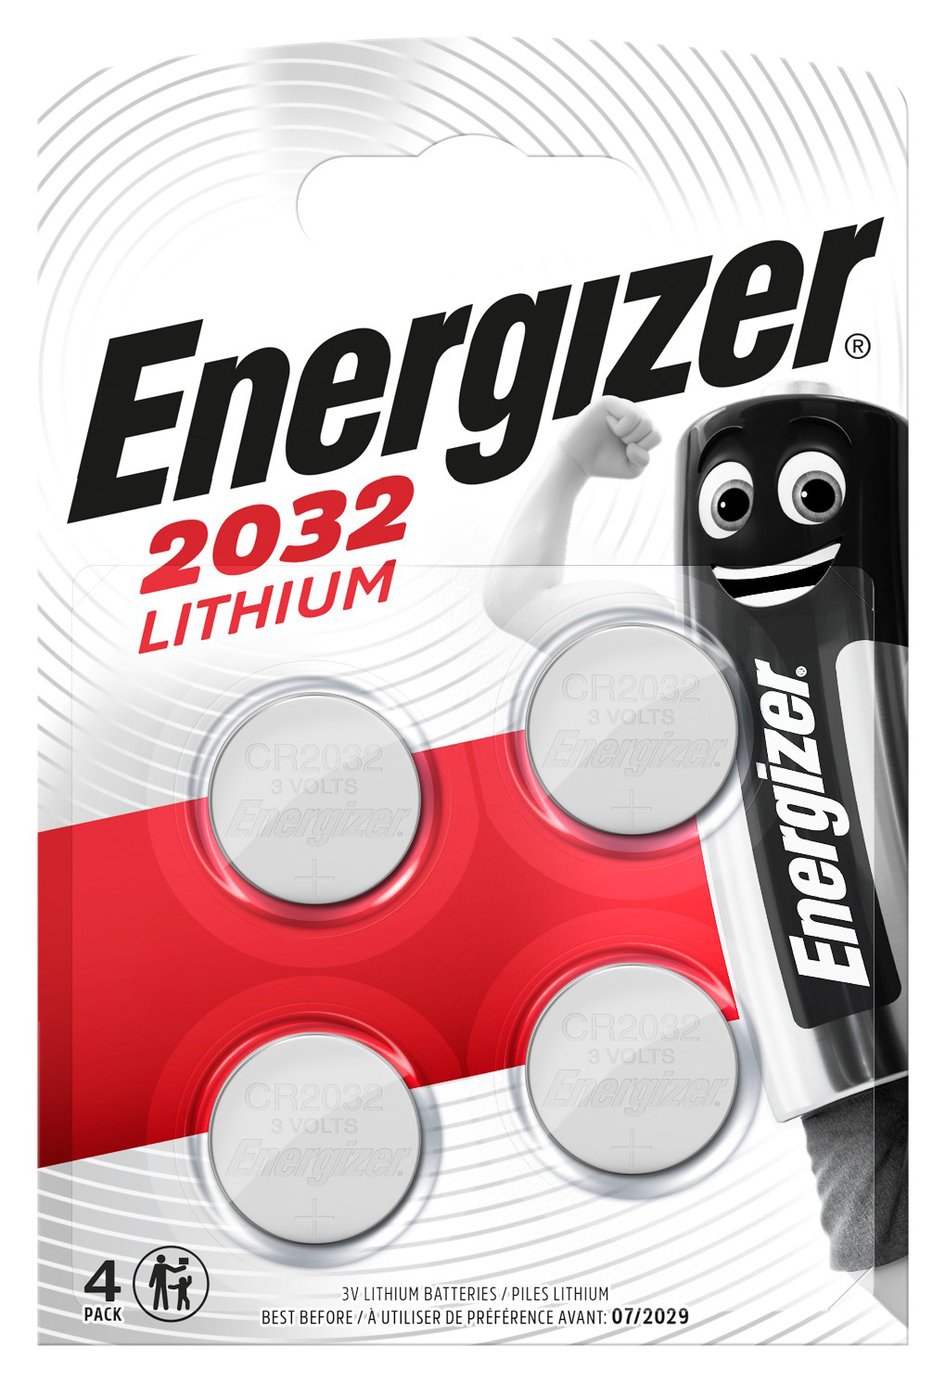 Energizer 2032 Lithium Coin Batteries - 4 Pack